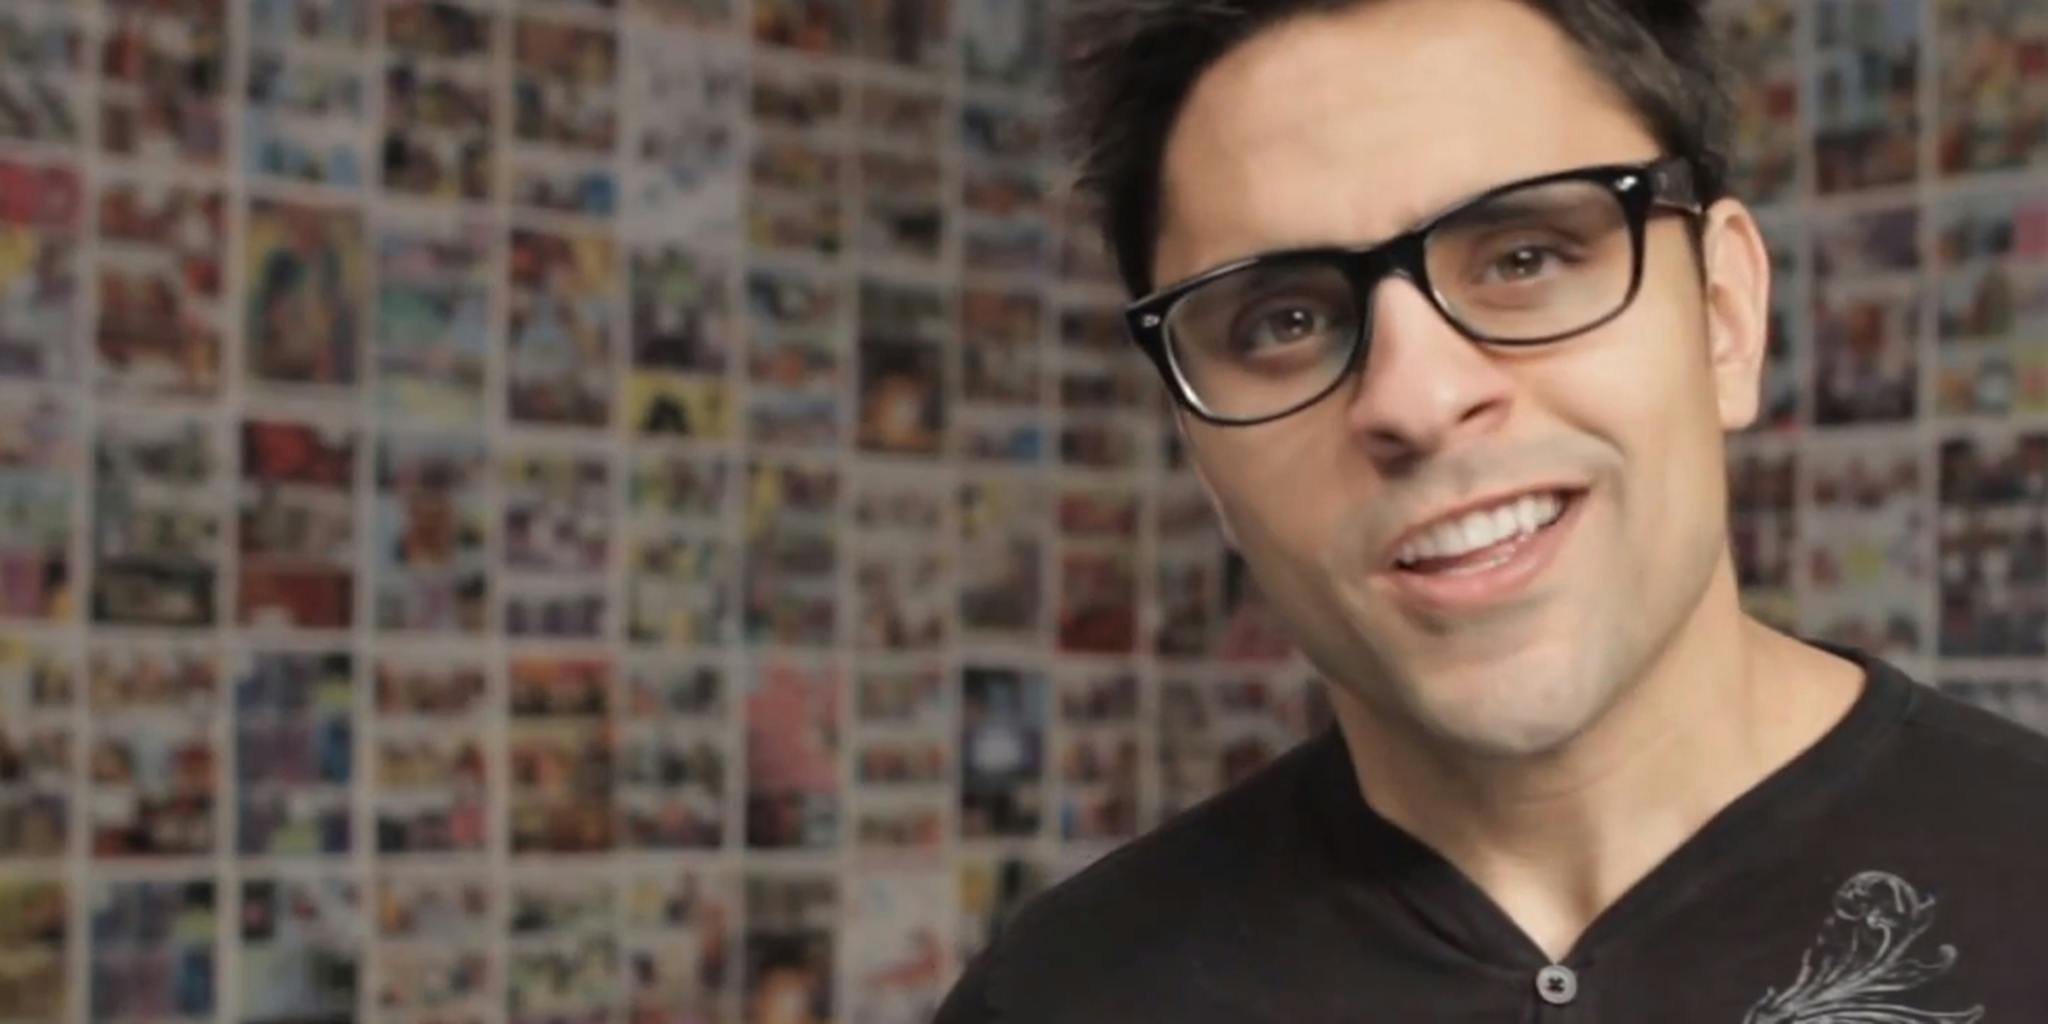 Ray William Johnson to file lawsuit against Maker Studios.